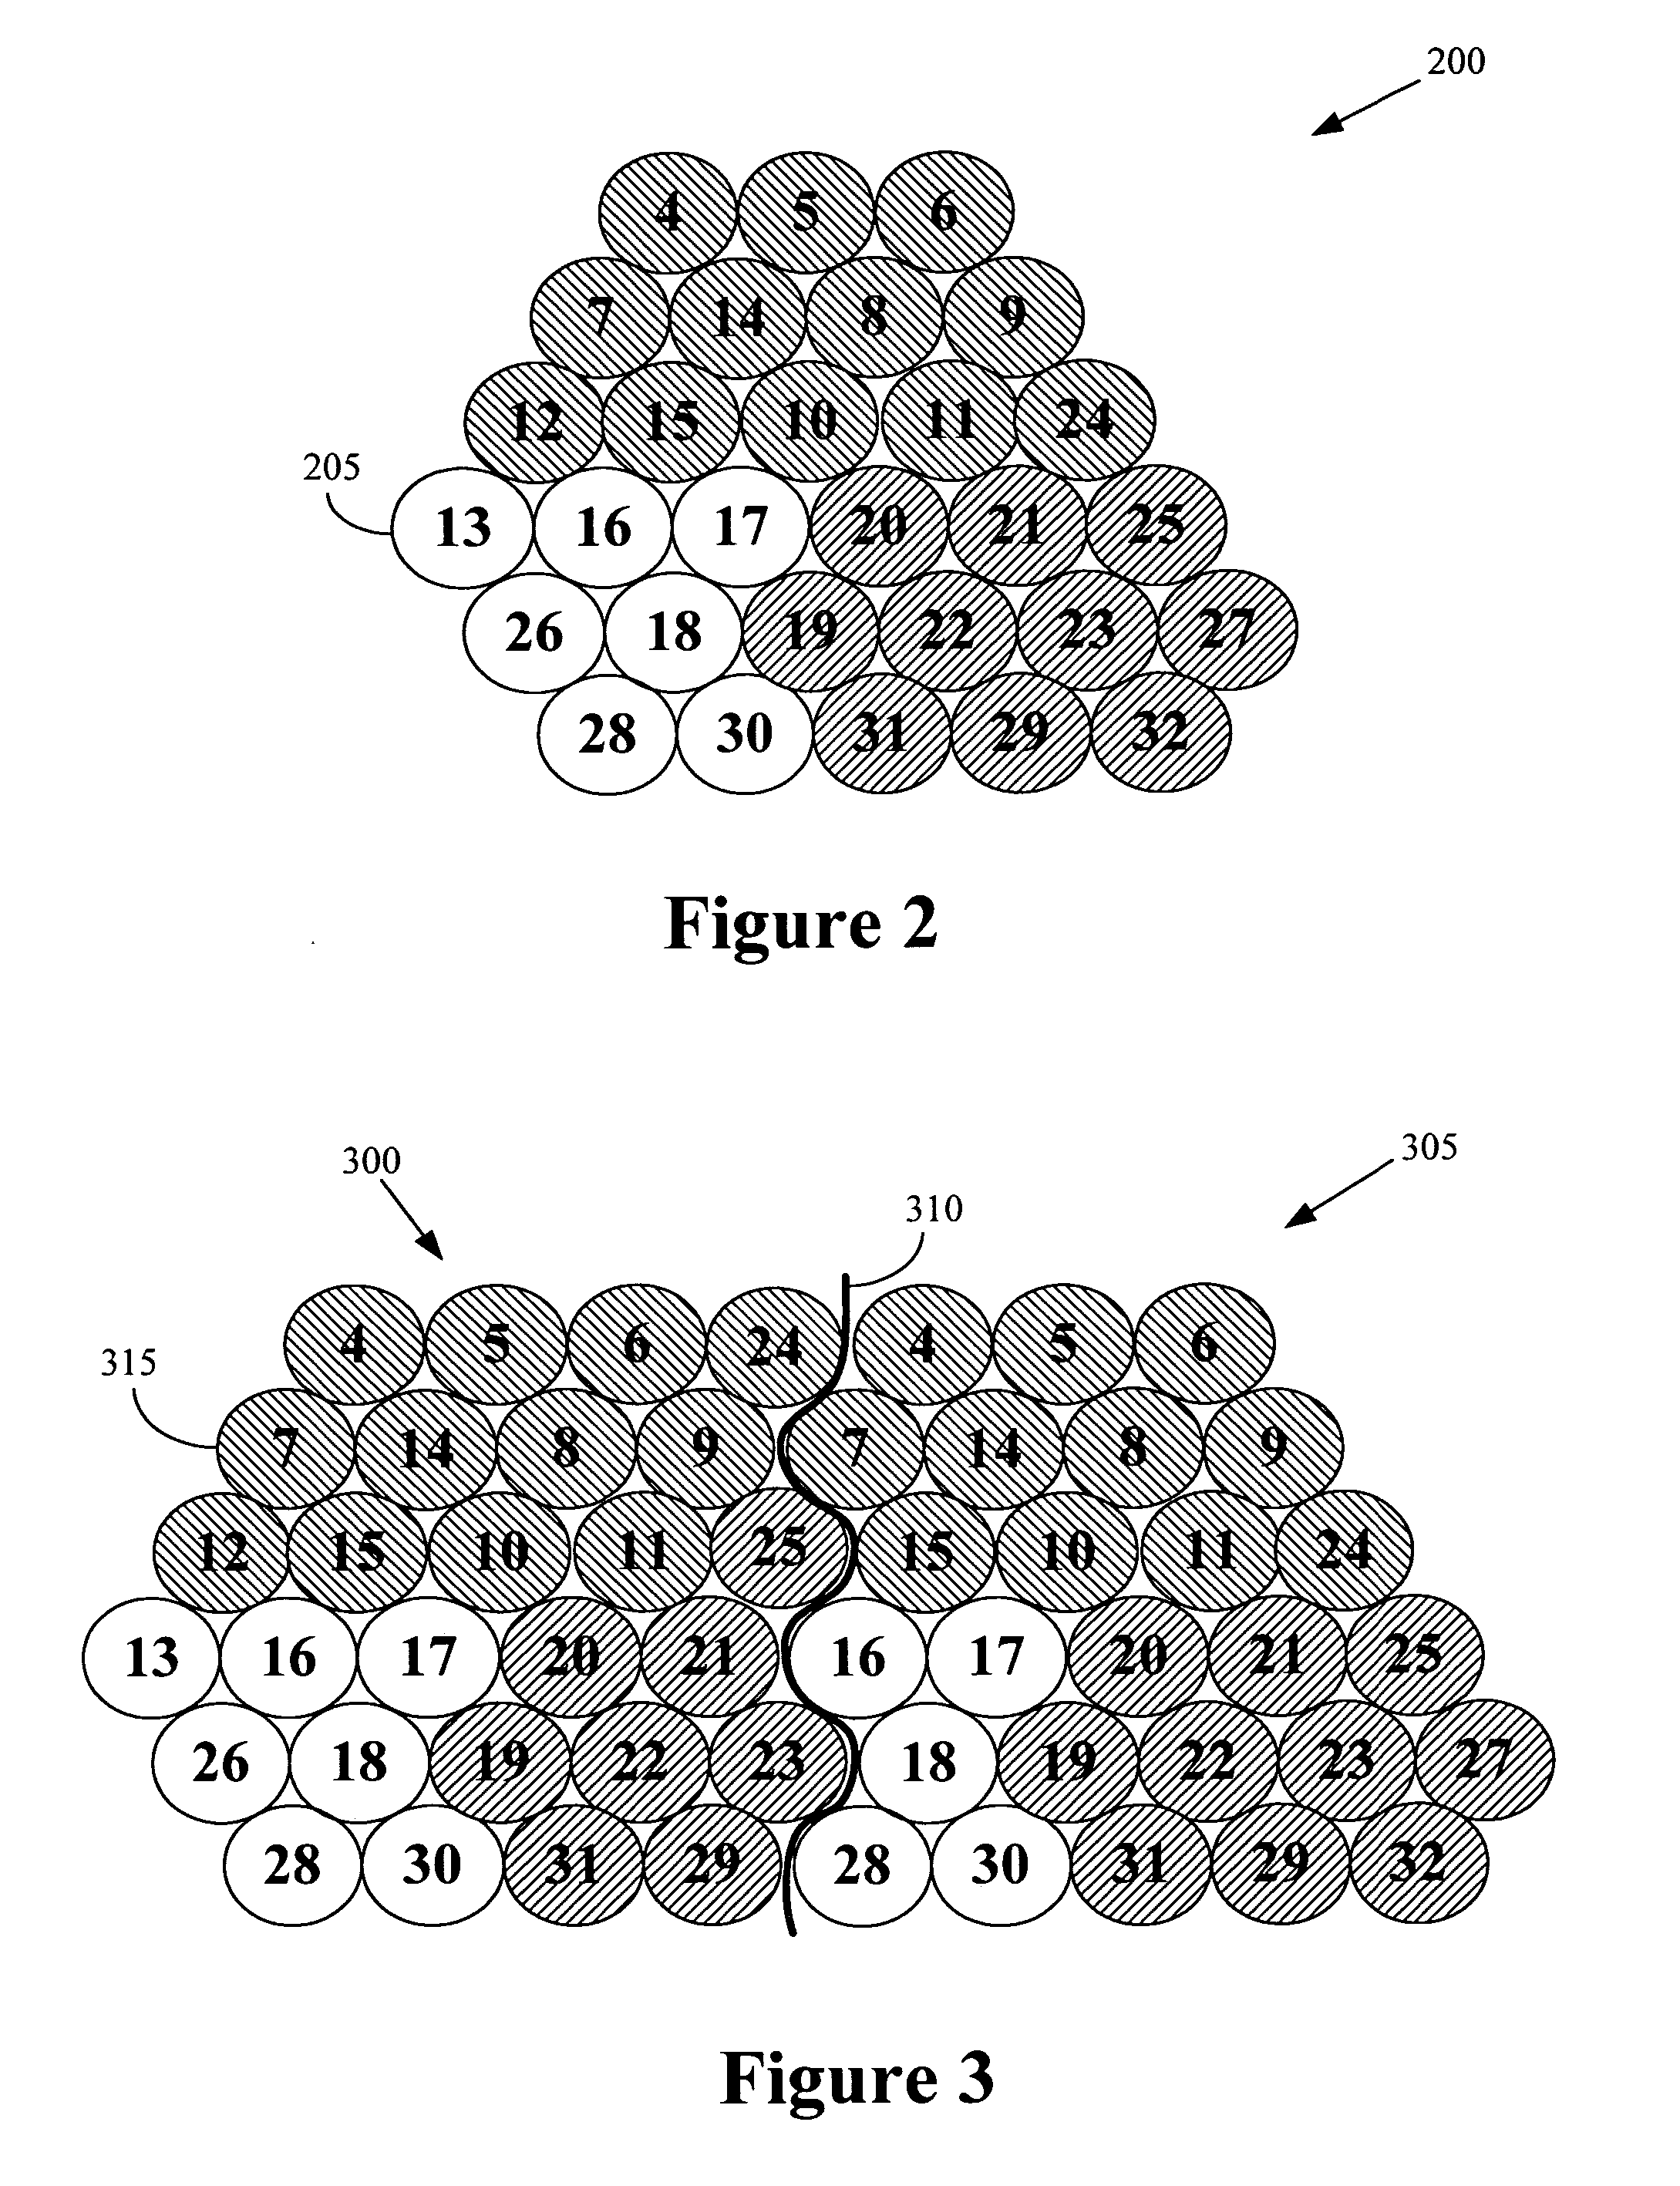 Method for selecting an inter-subnet idle hand-off technique